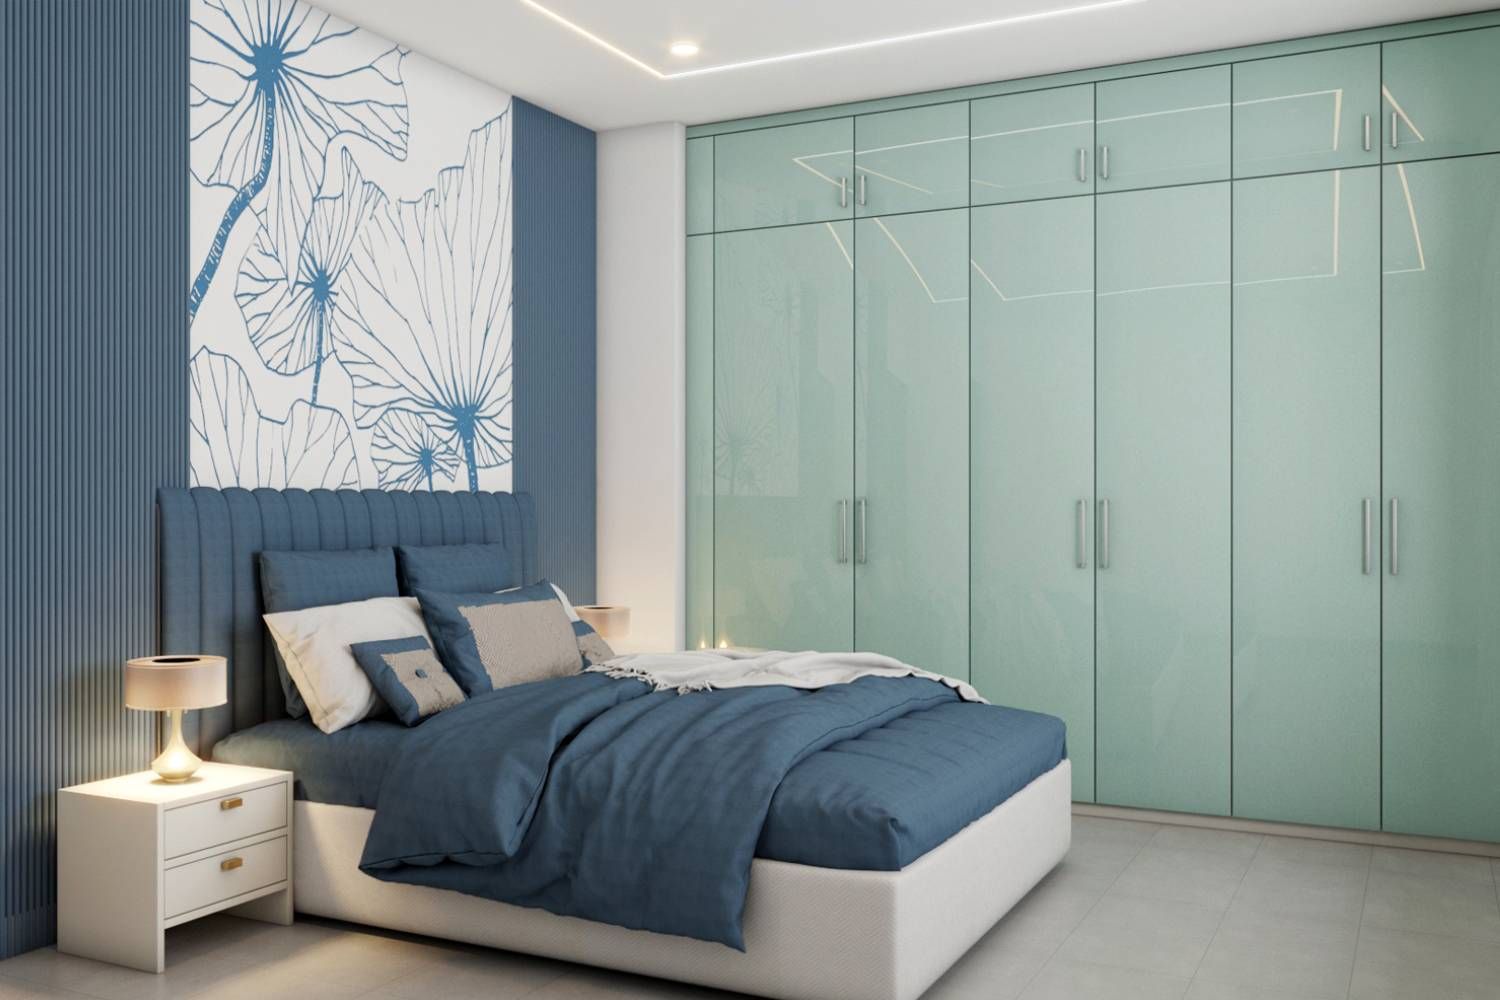 Contemporary Blue And Mint Green Guest Room Design With 6-Door Glossy Swing Wardrobe